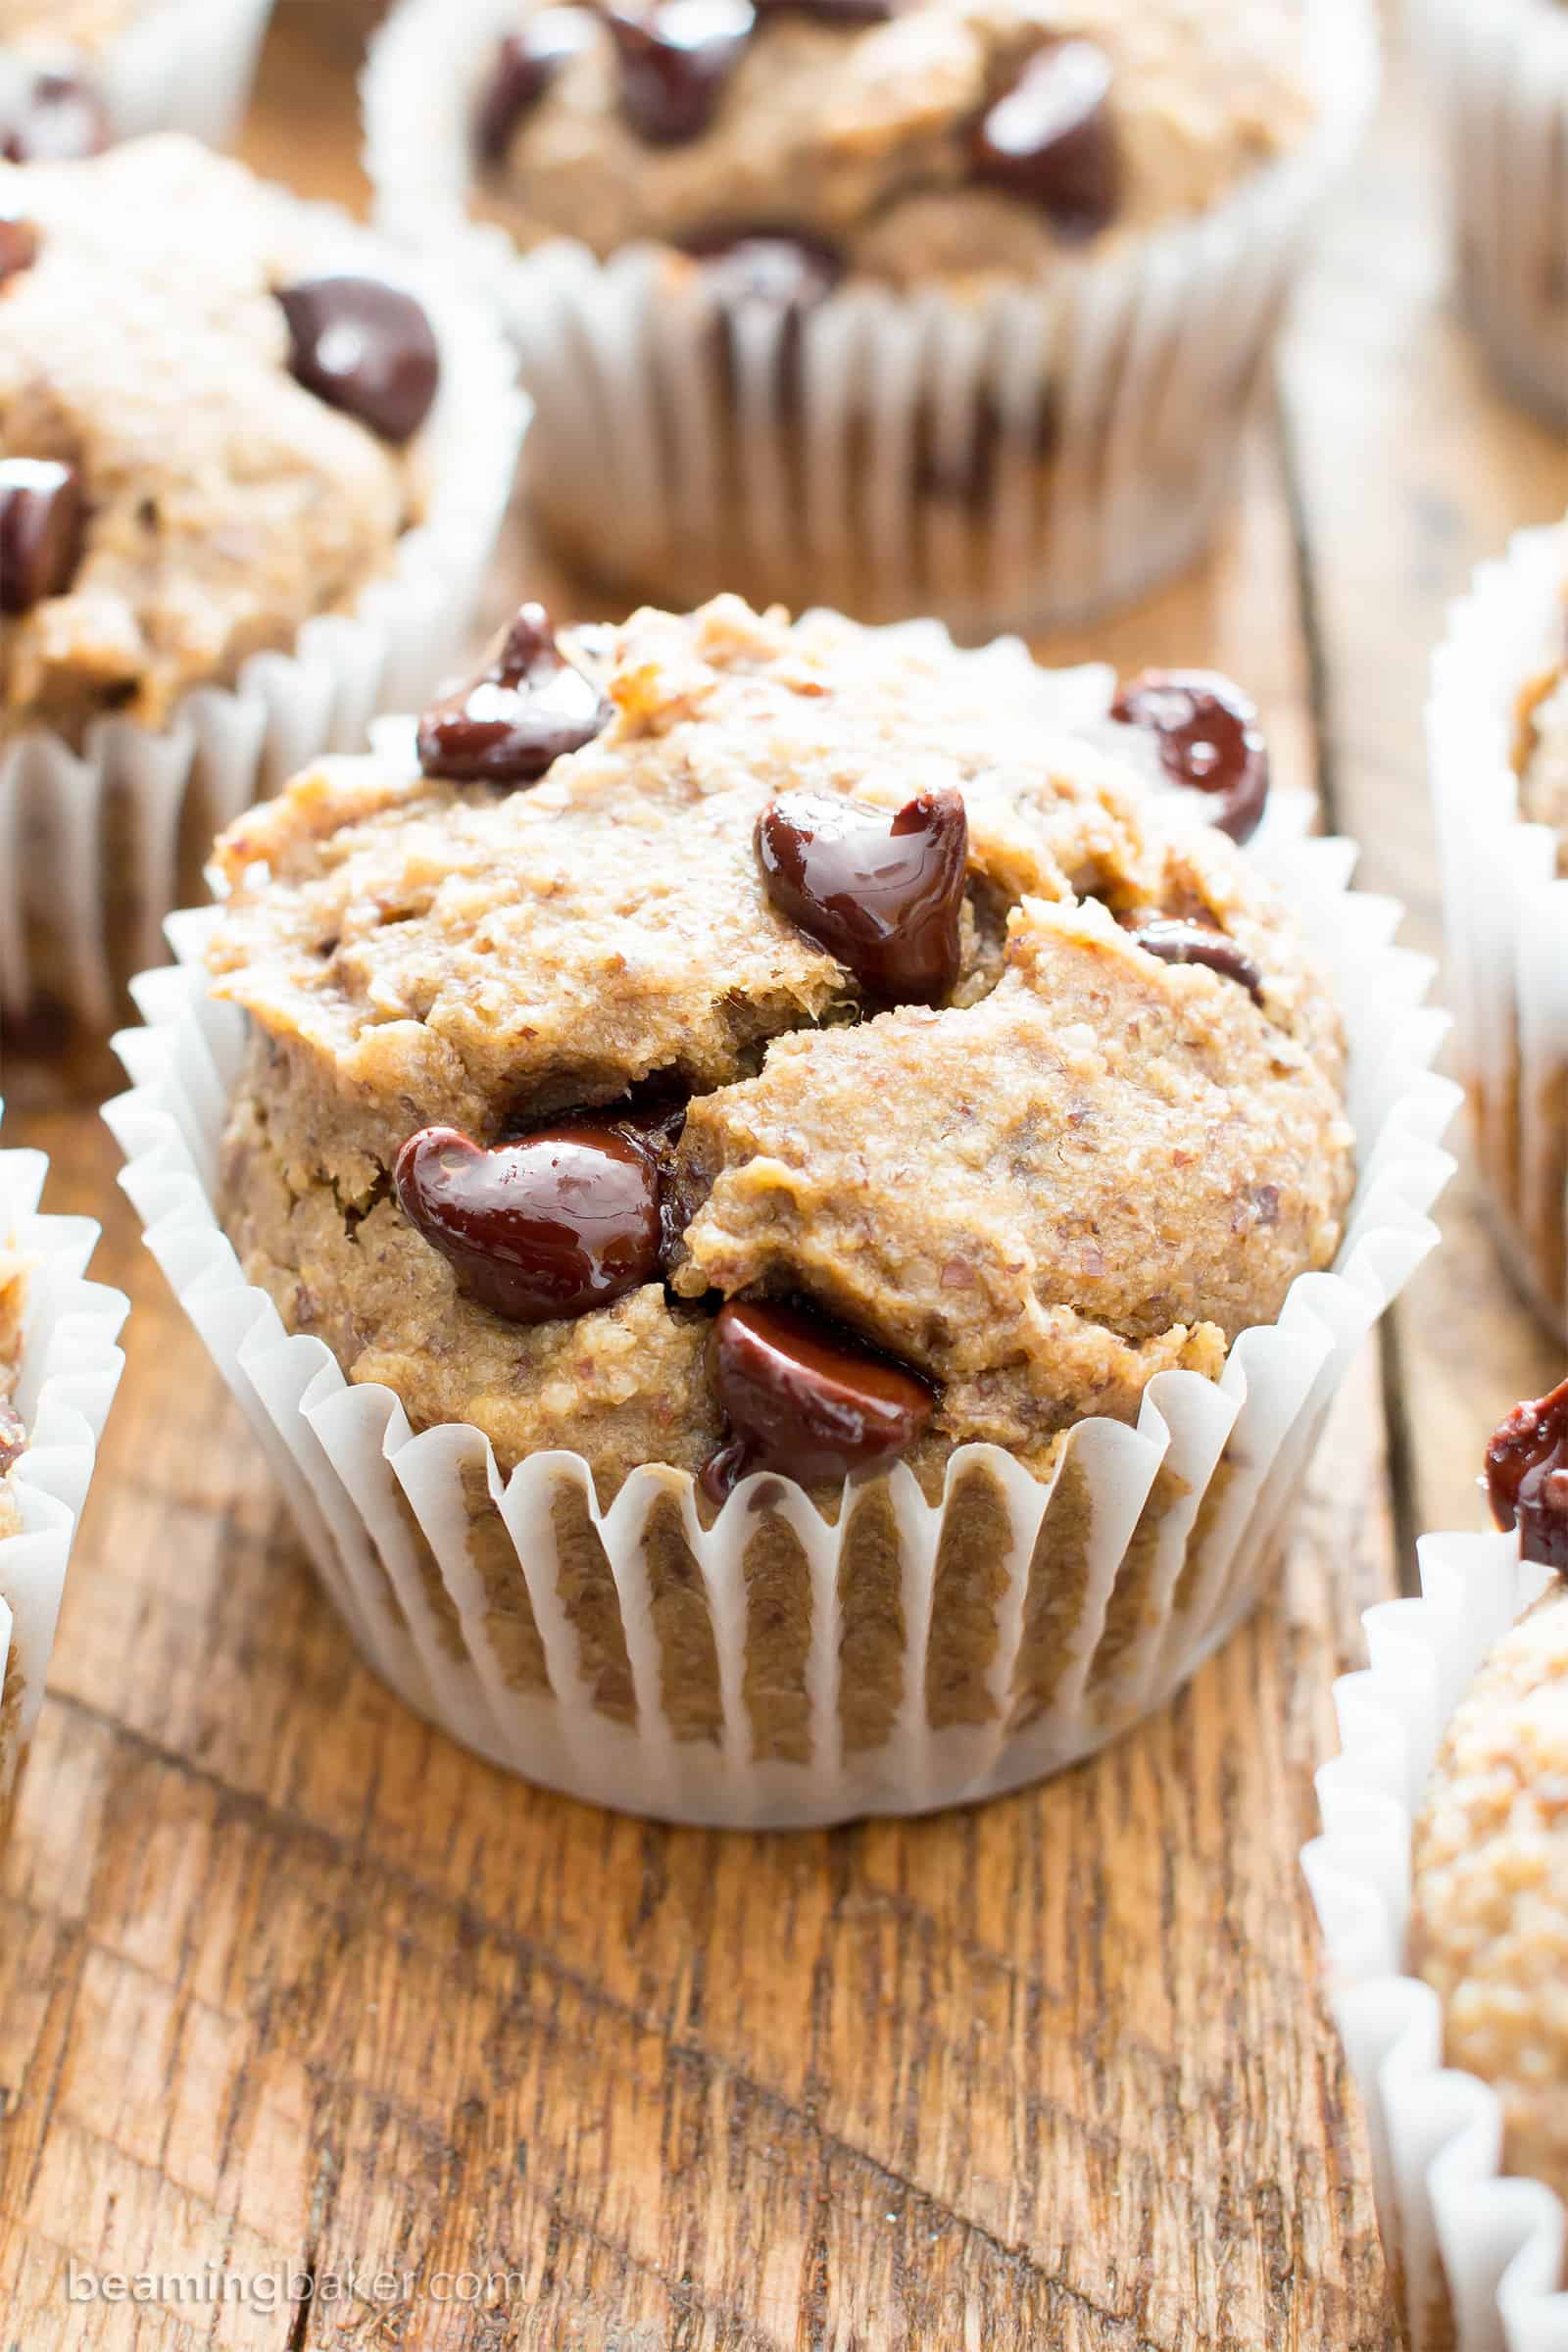 15+ Best Gluten Free Muffin & Quick Bread Recipes (V, GF): a fantastic collection of the best gluten free recipes for perfectly moist muffins mouthwatering quick breads! #Vegan #GlutenFree #DairyFree #RefinedSugarFree #Muffins #Bread | Recipes on BeamingBaker.com